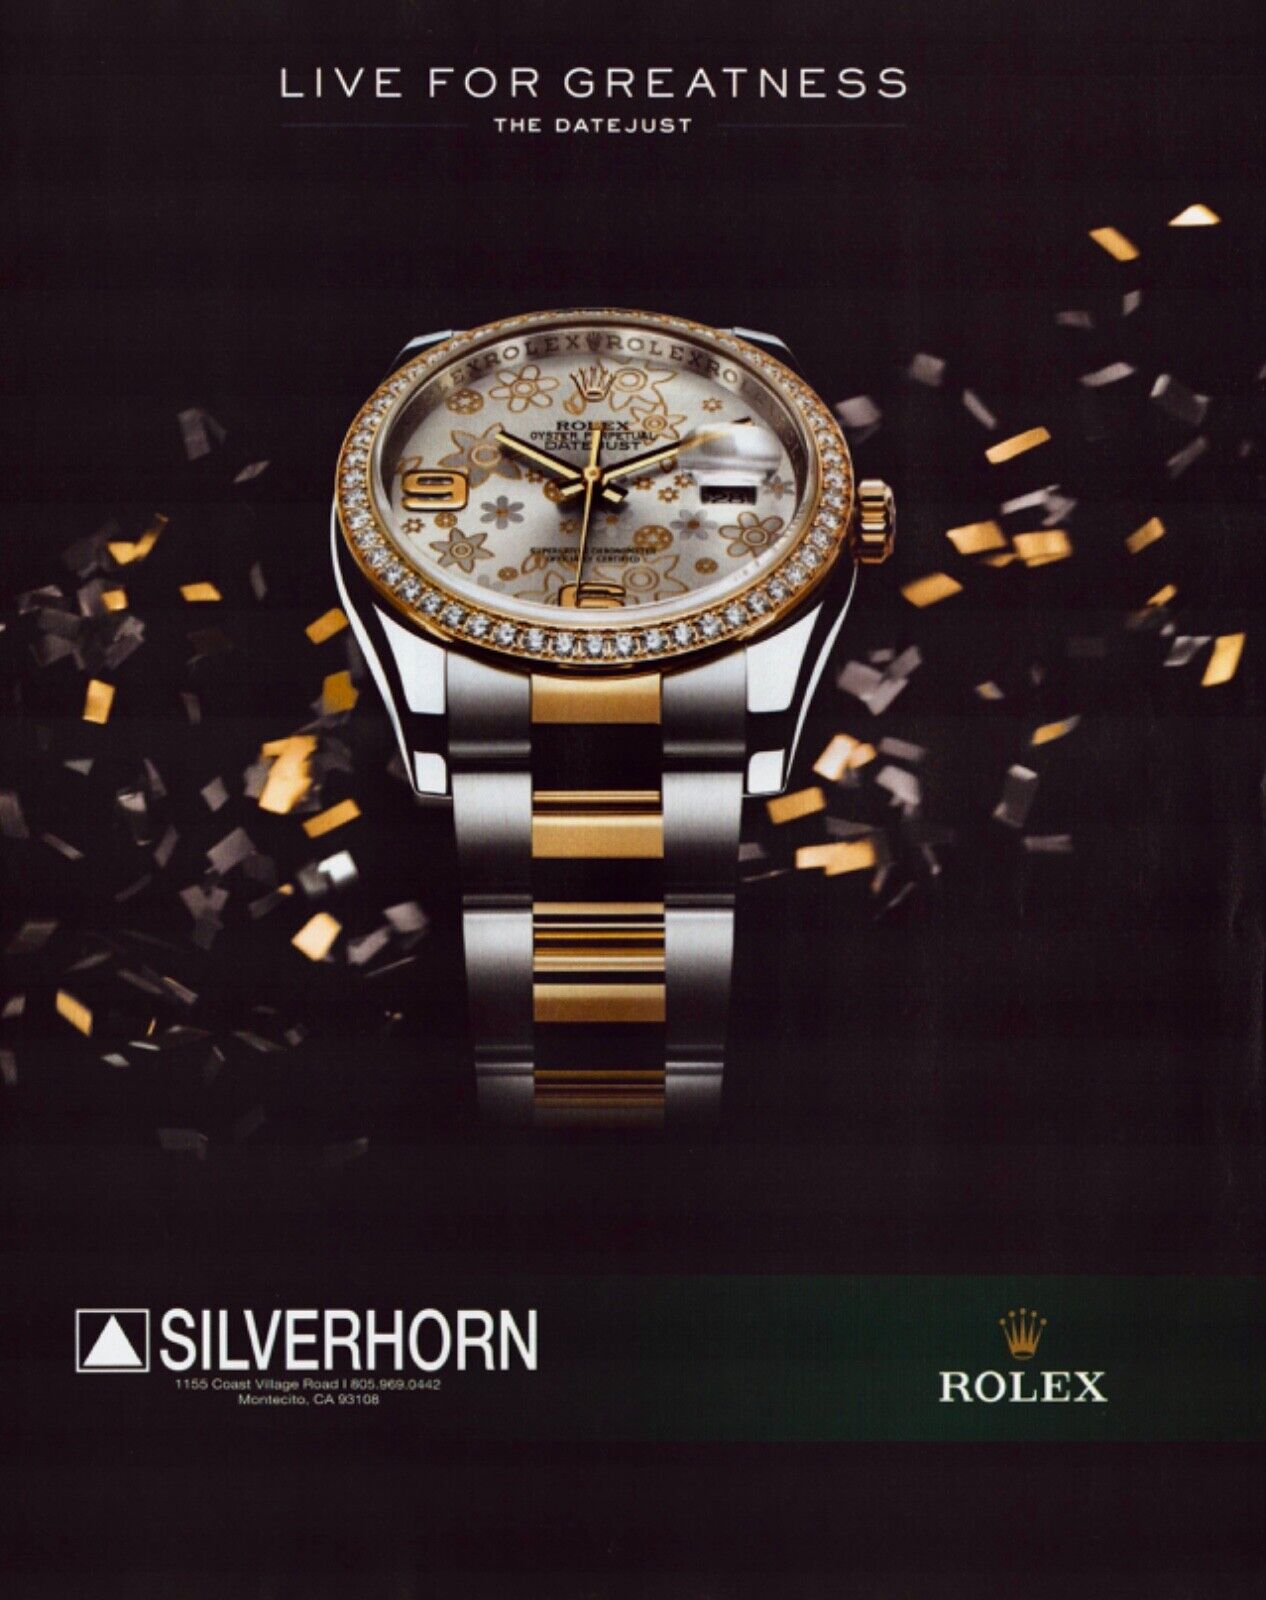 2012 ROLEX Datejust Watch ~ Live For Greatness ~ VINTAGE PRINT AD